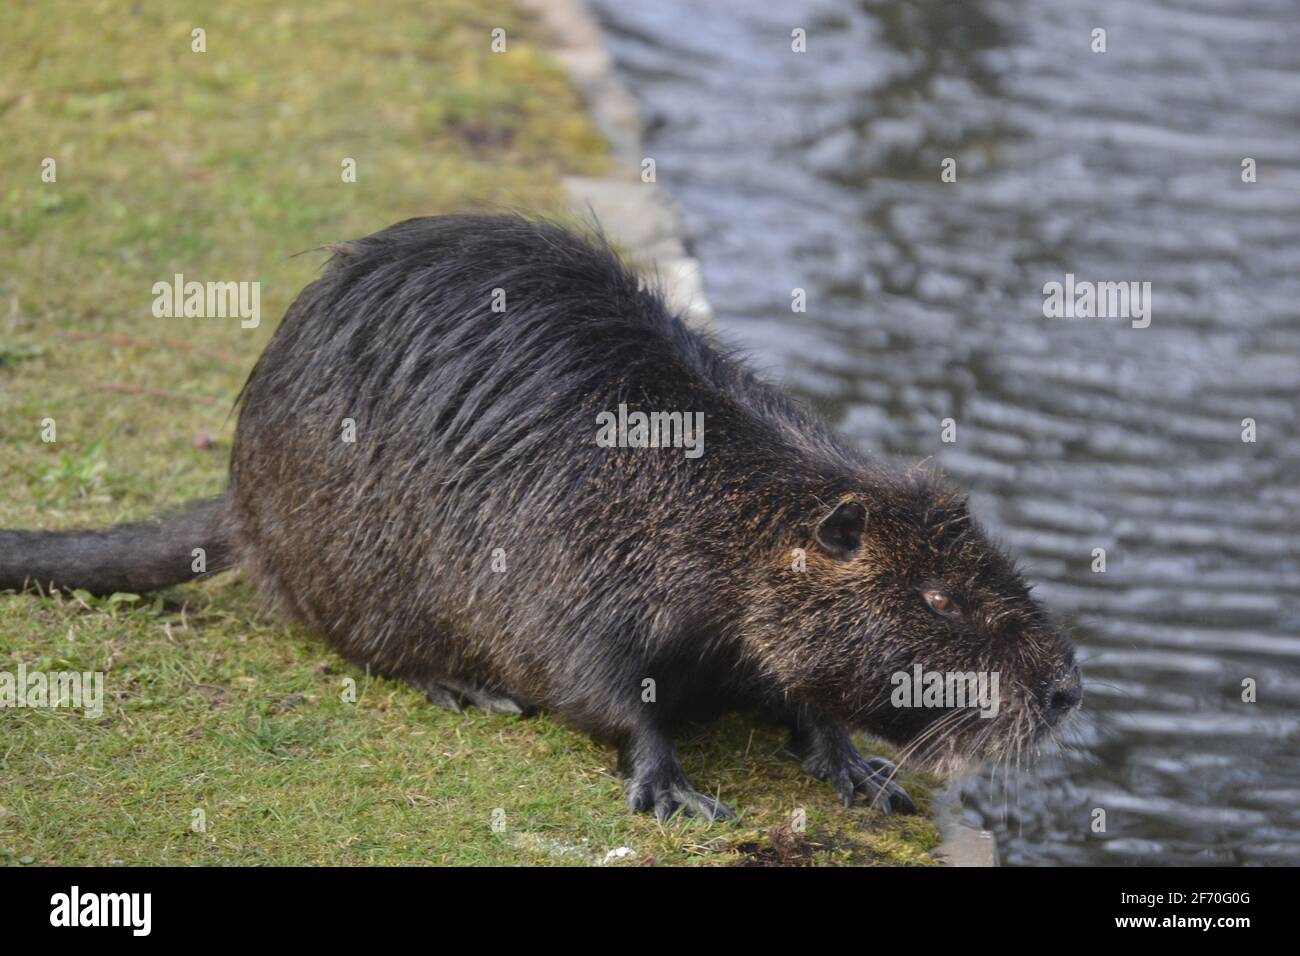 The beaver jumps into the pond Stock Photo